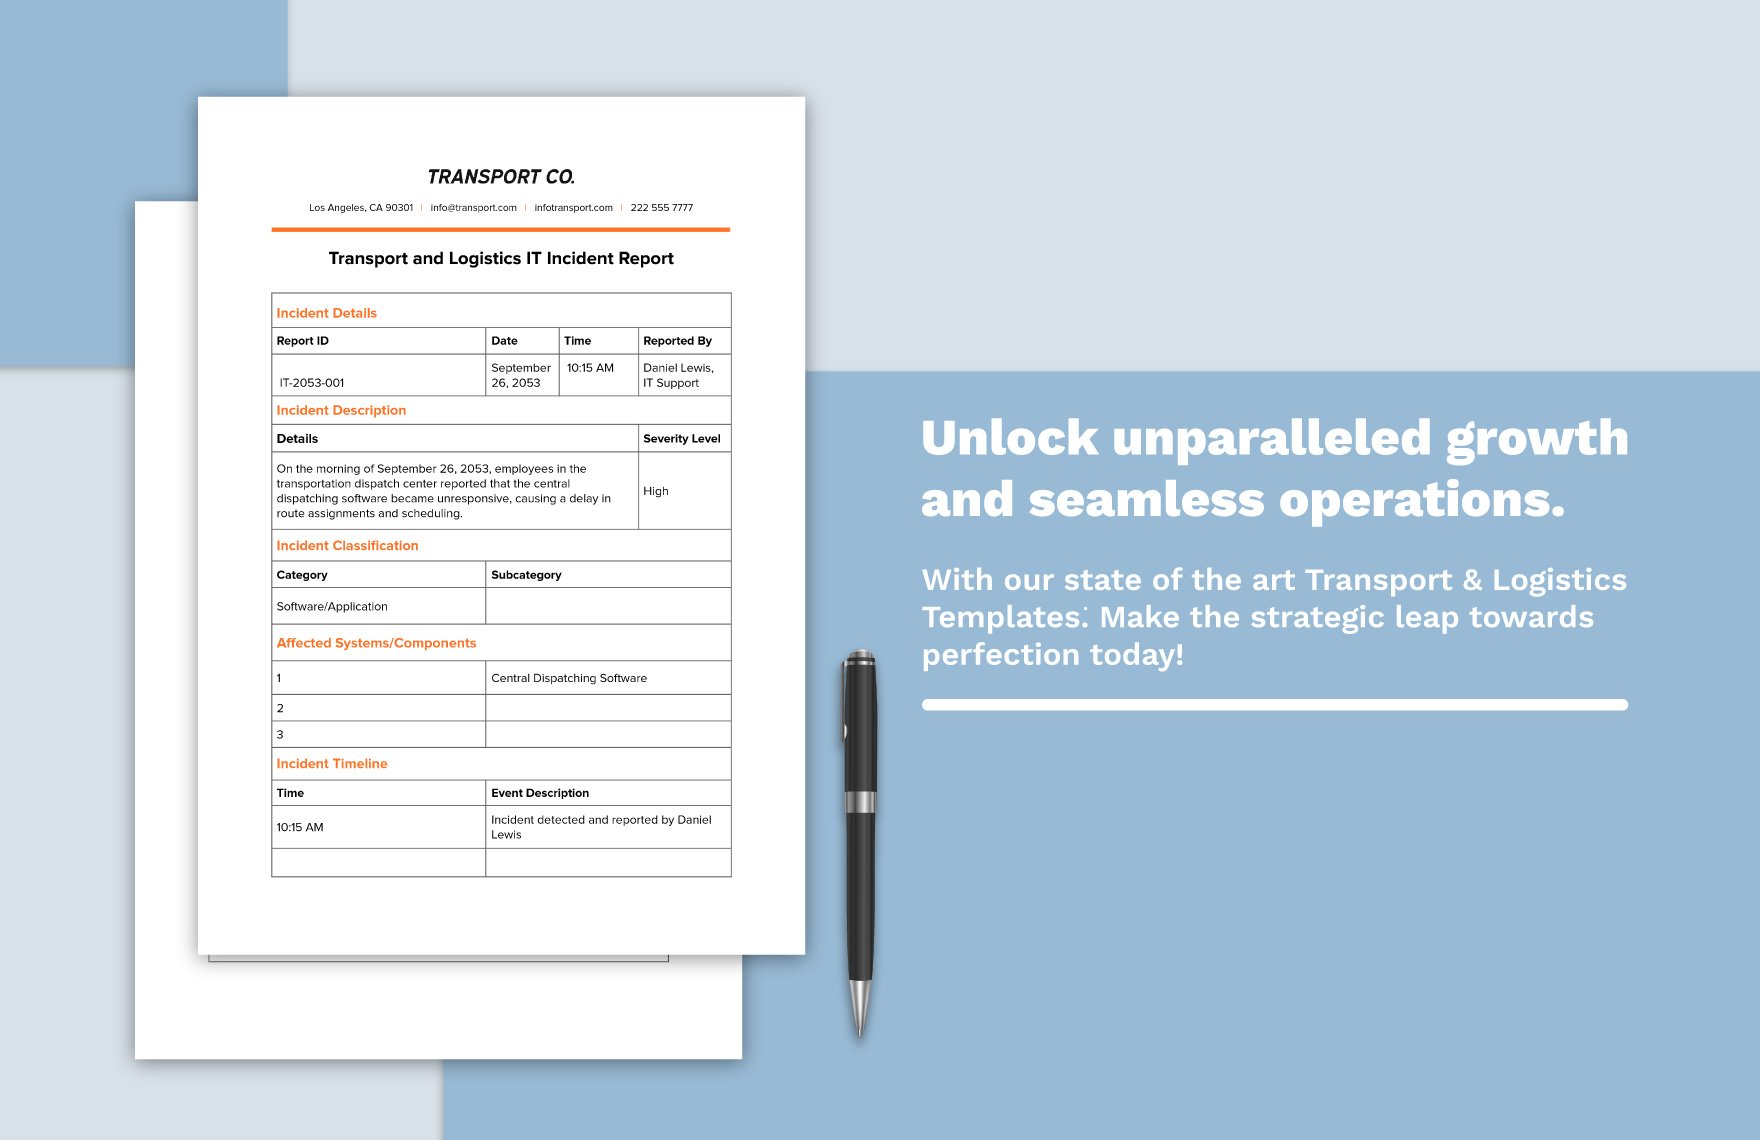 Transport and Logistics IT Incident Report Template